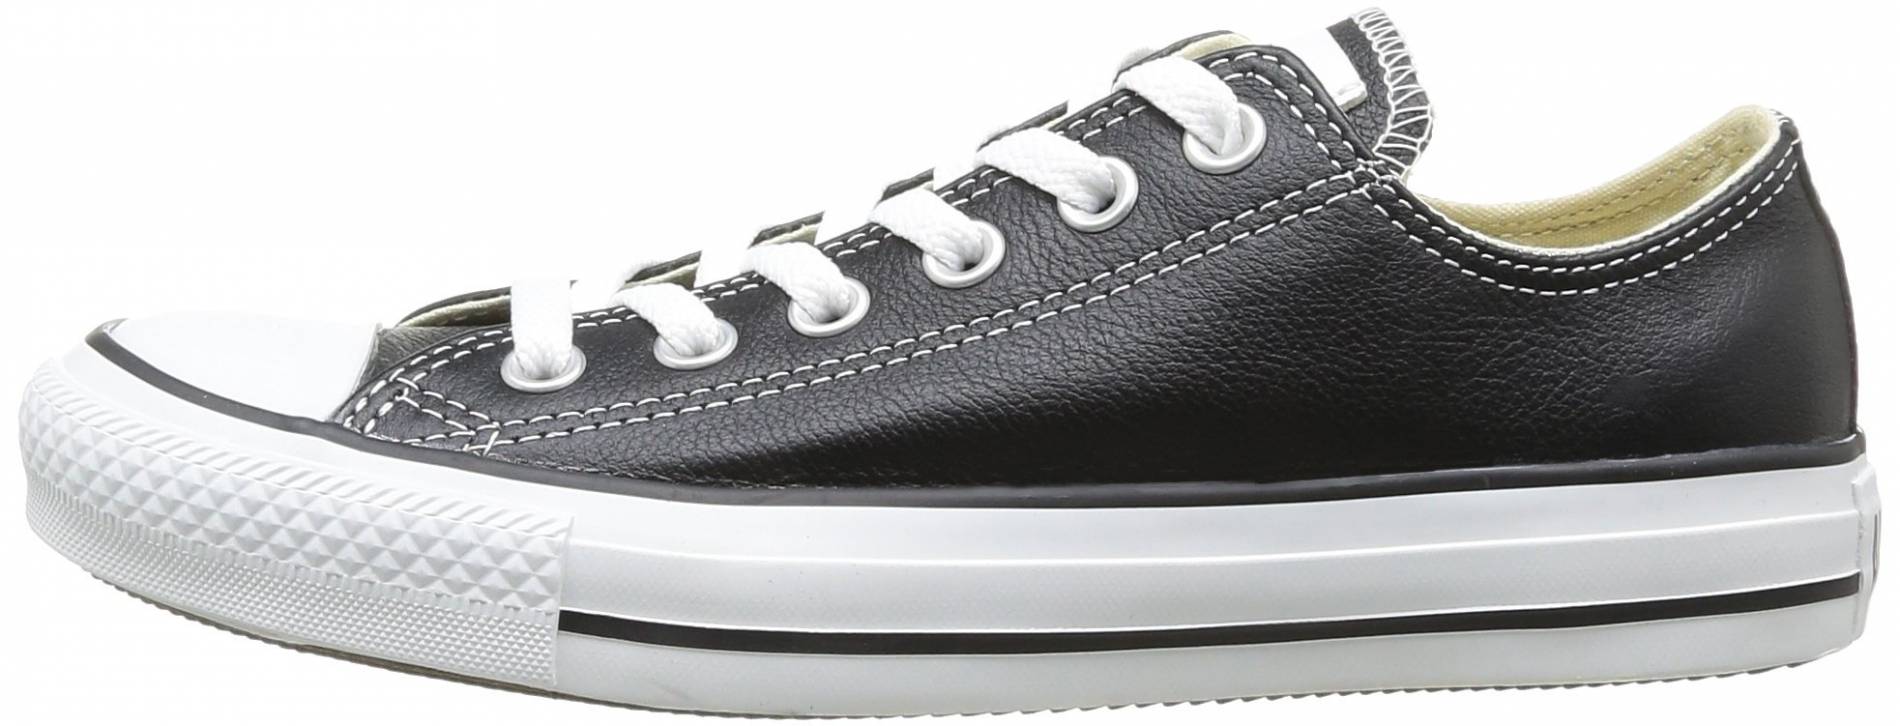 Activate explosion did it Converse Chuck Taylor All Star Leather Low Top sneakers in 3 colors |  RunRepeat